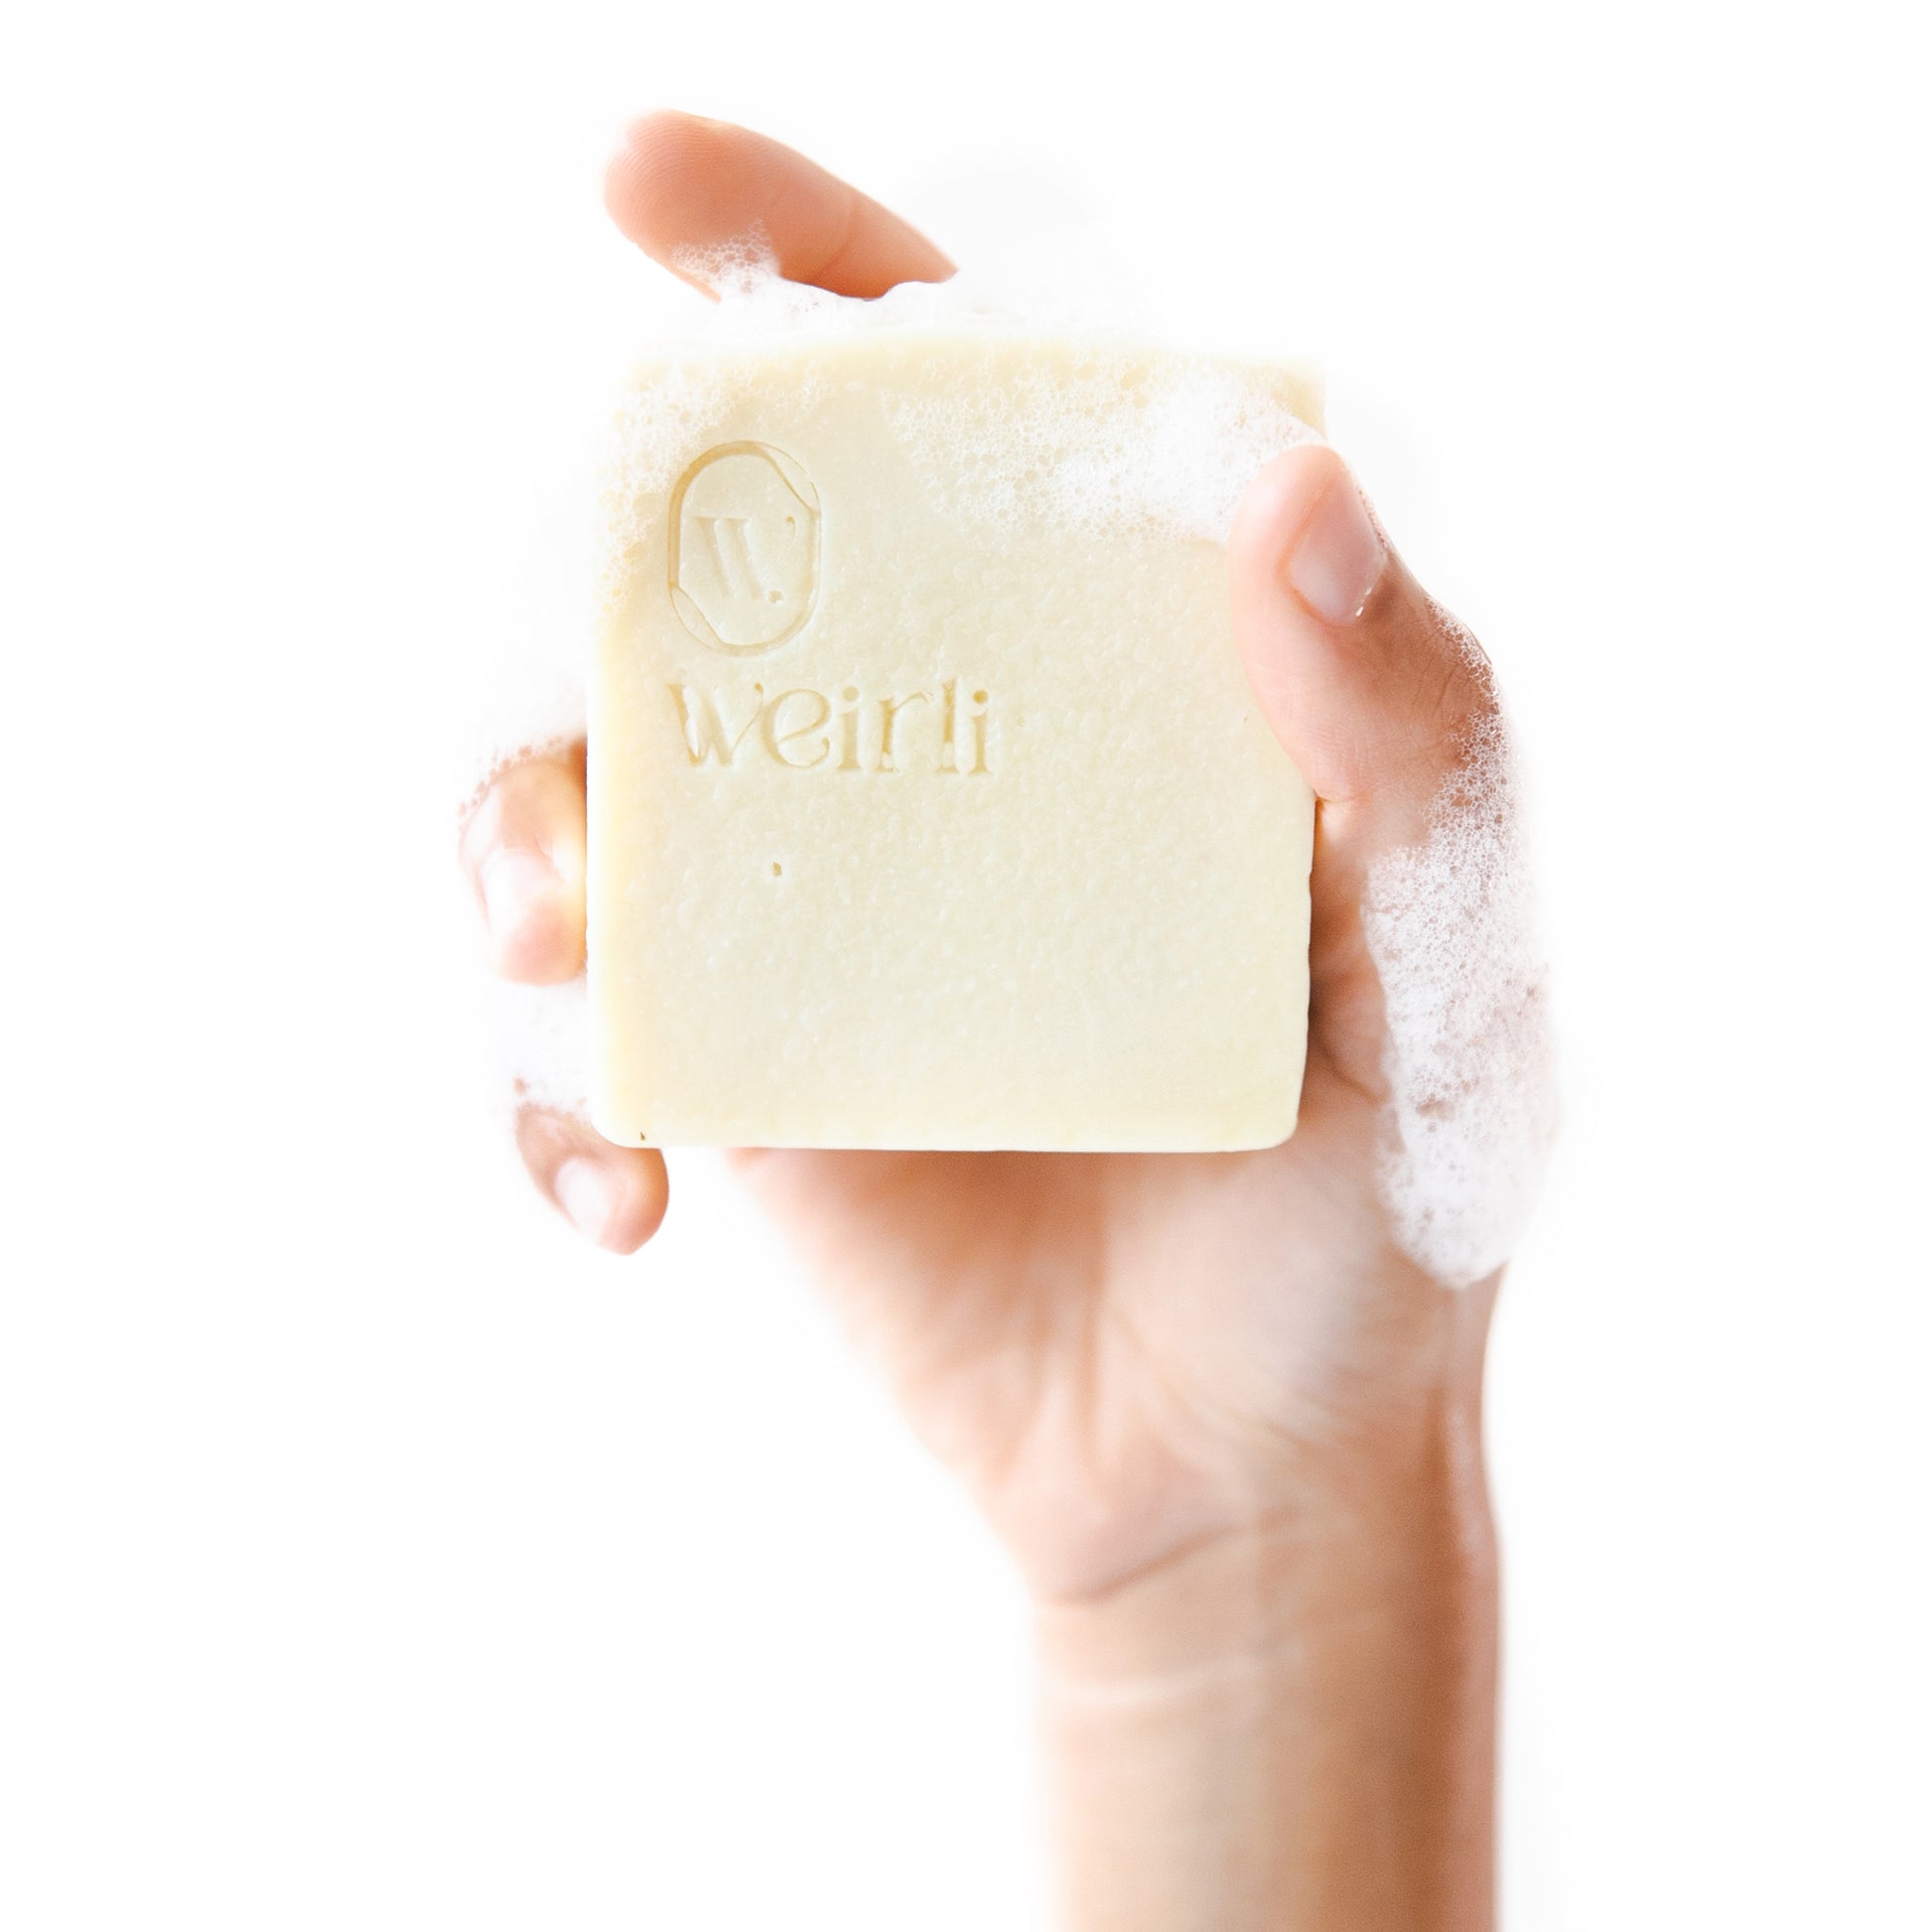 Soapy shea and oat soap square held up by a hand